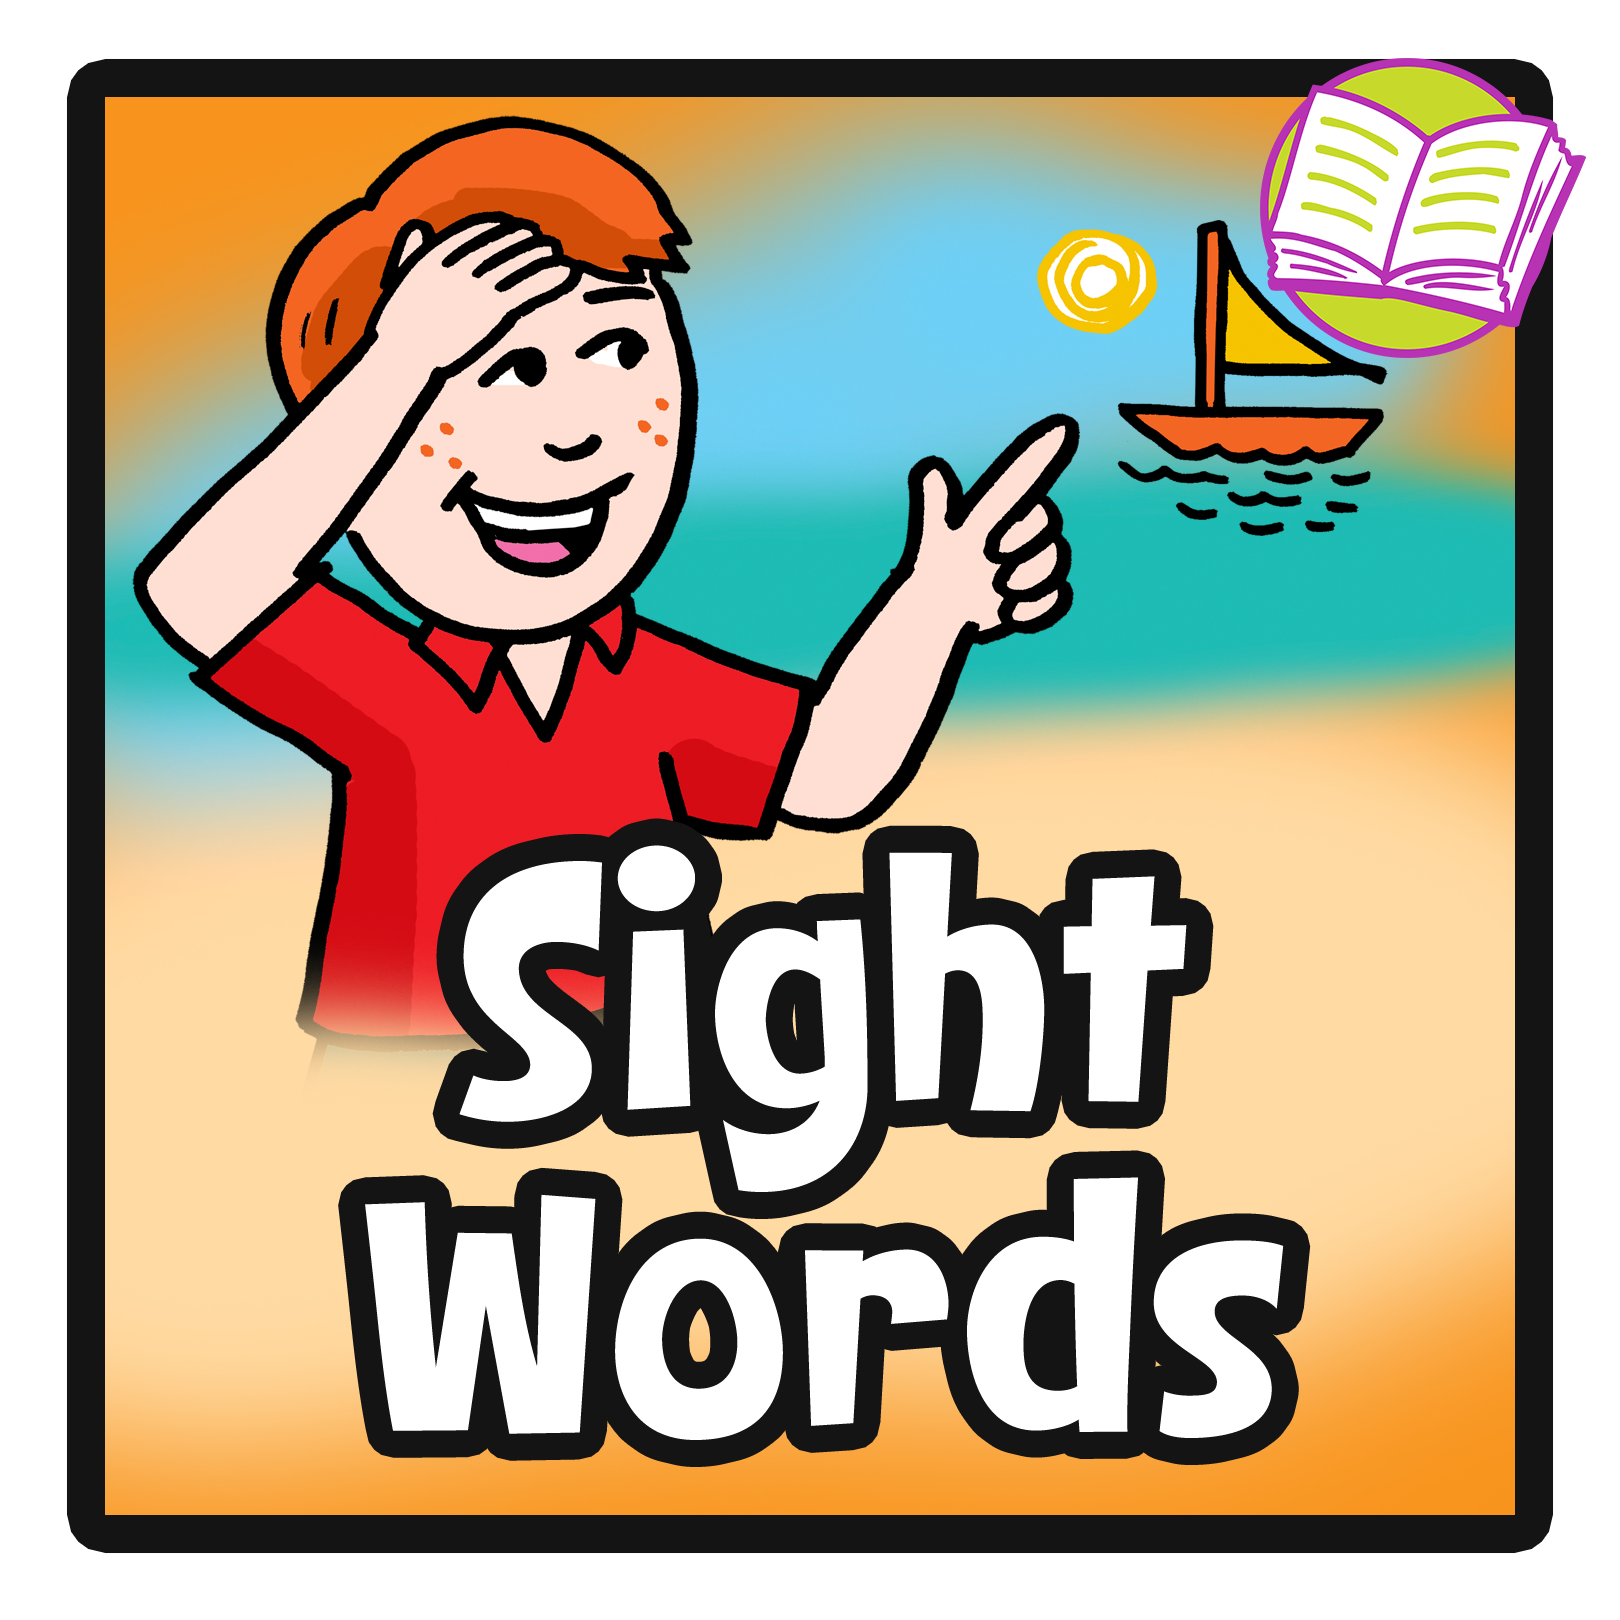 word clipart library - photo #22